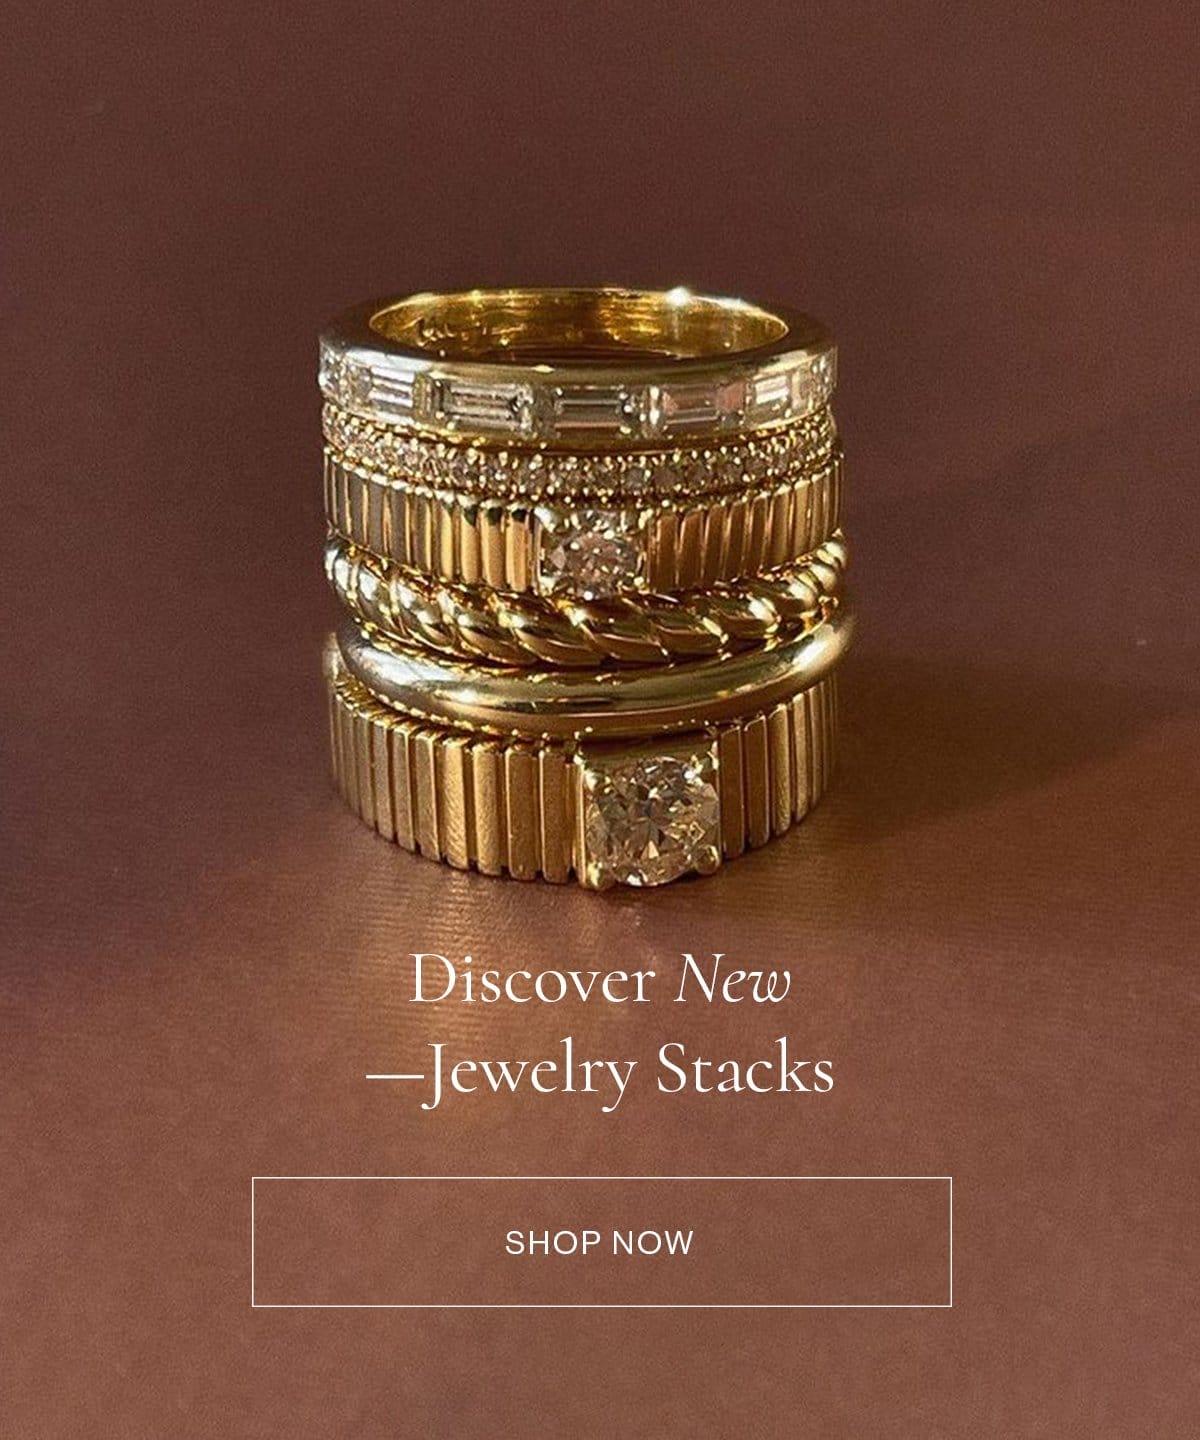 Discover New Jewelry Stacks